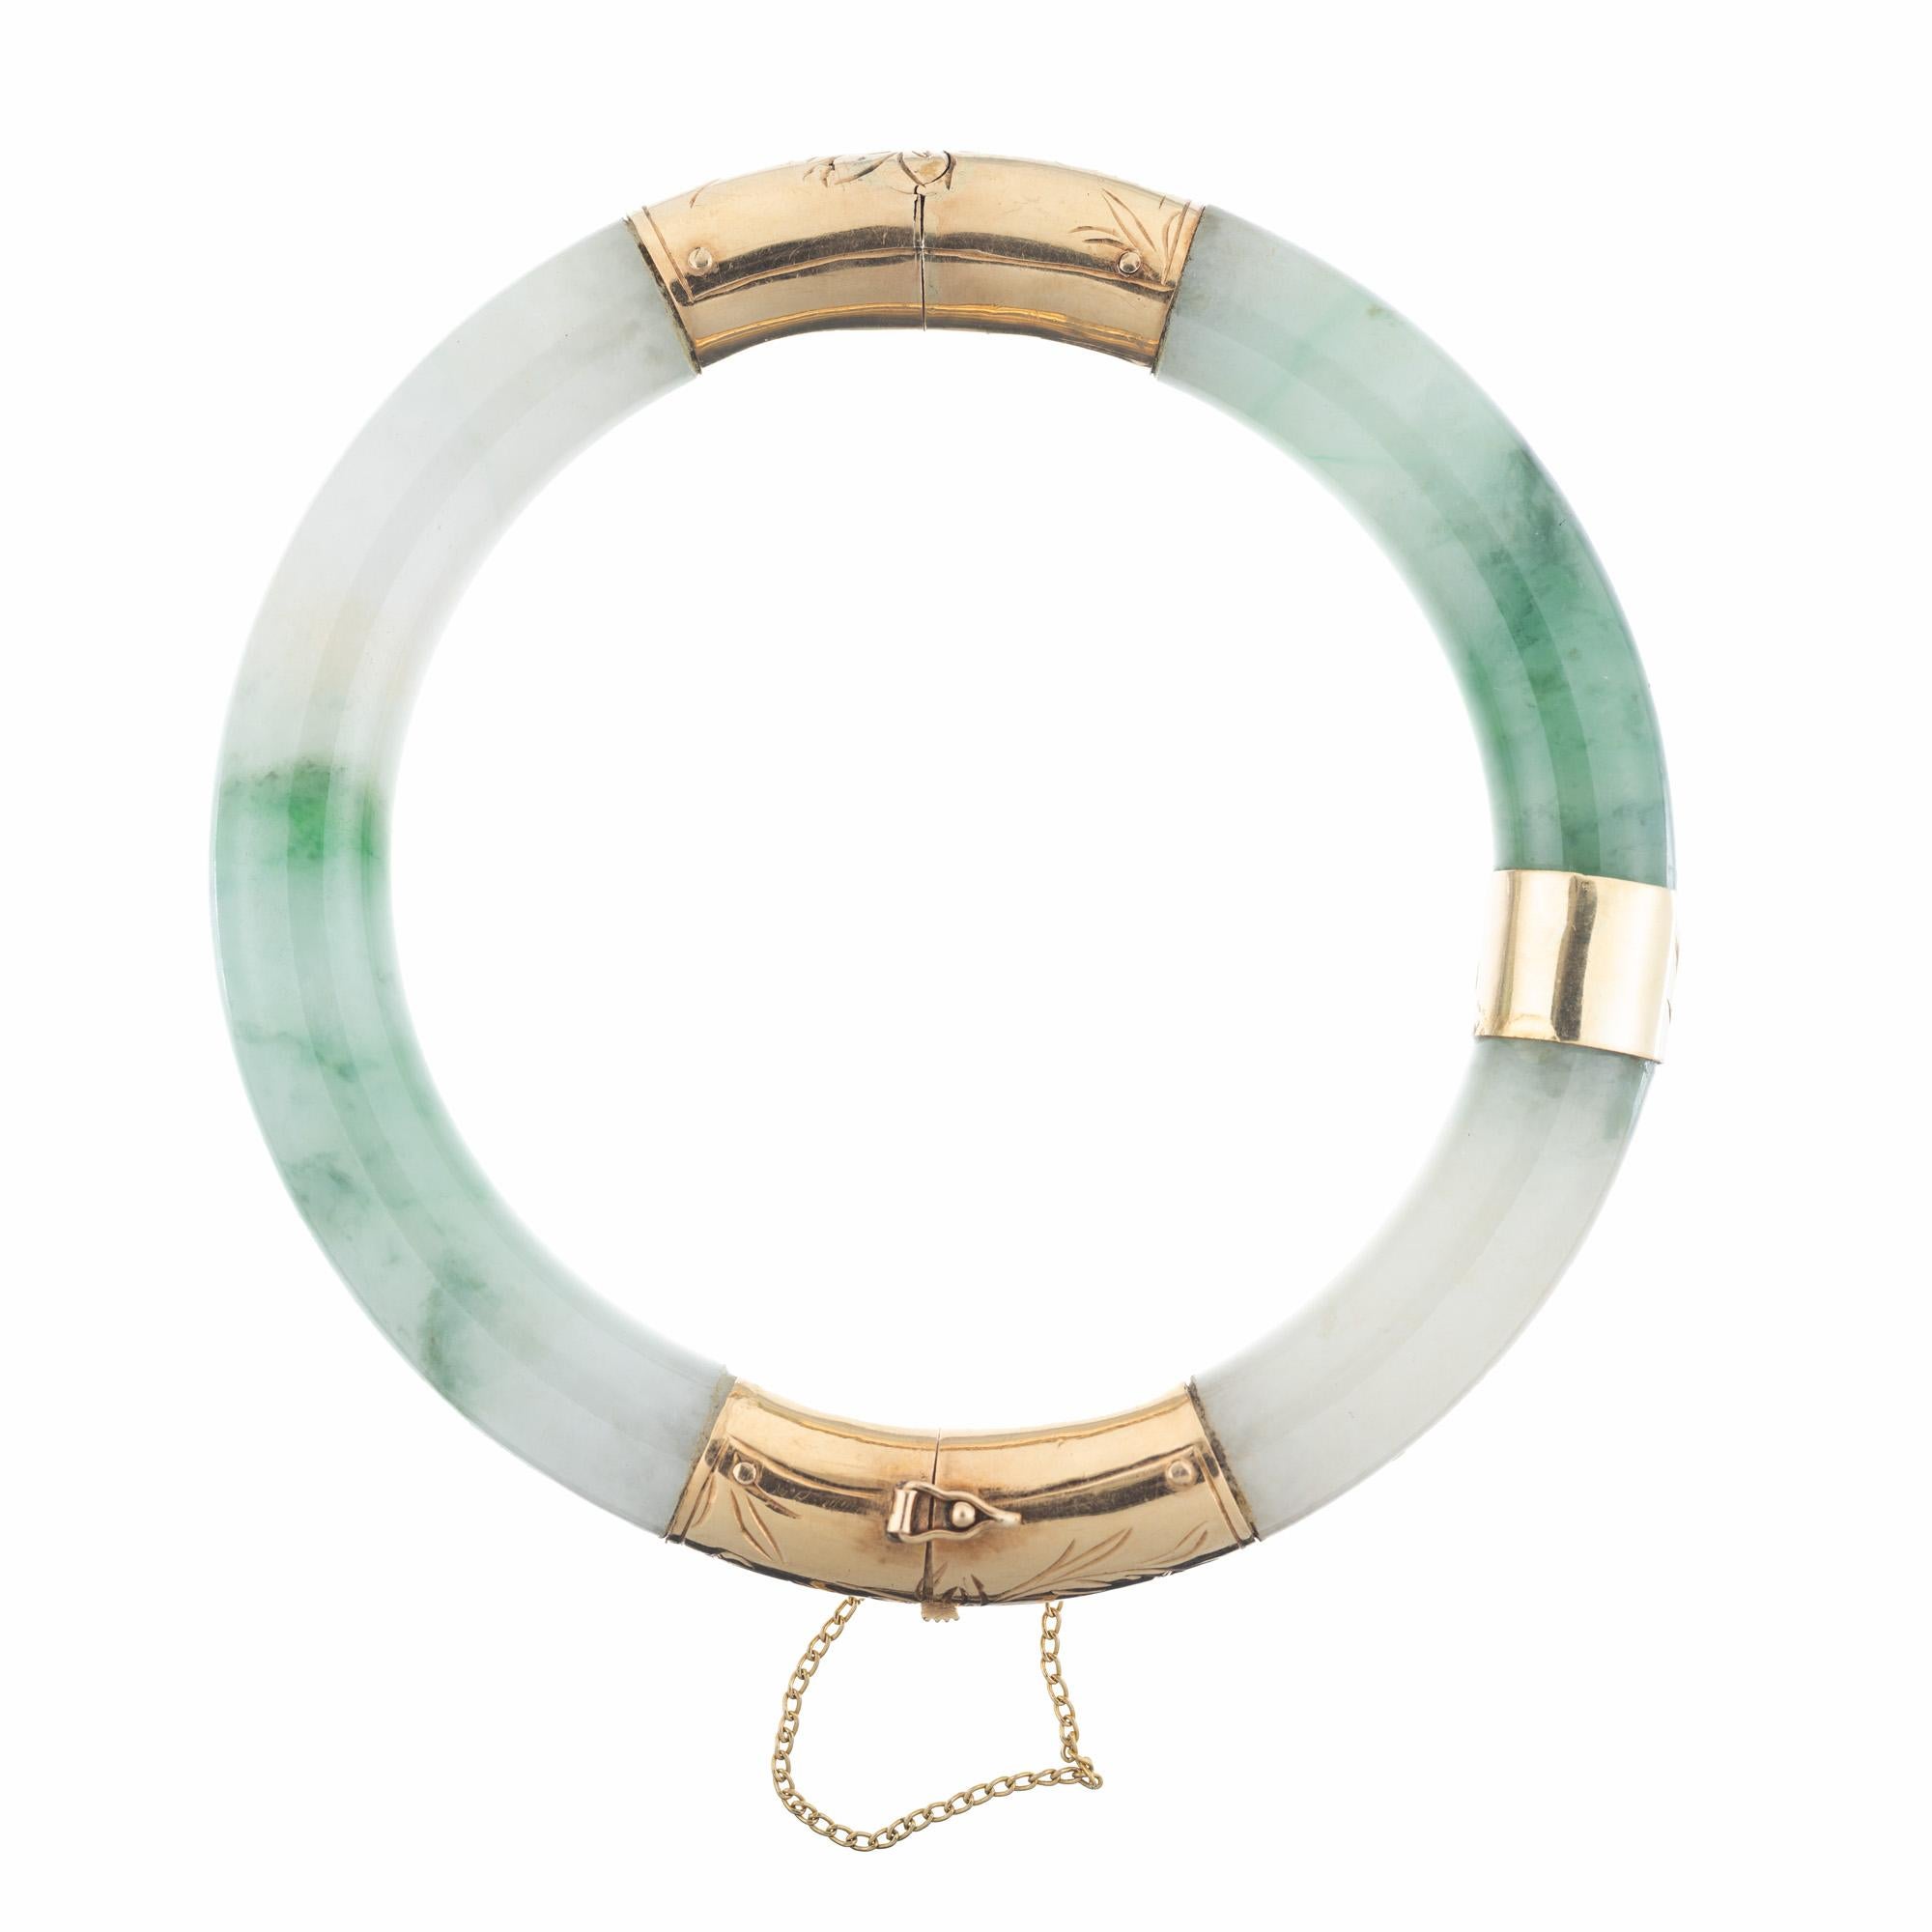 Vintage 1950's mid-century hinged jadeite jade bangle bracelet. GIA Certified Jadeite Jade Yellow Gold Bangle Bracelet. The GIA has certified the jade as natural, no indications of impregnation. The vibrant 14k yellow gold setting beautifully